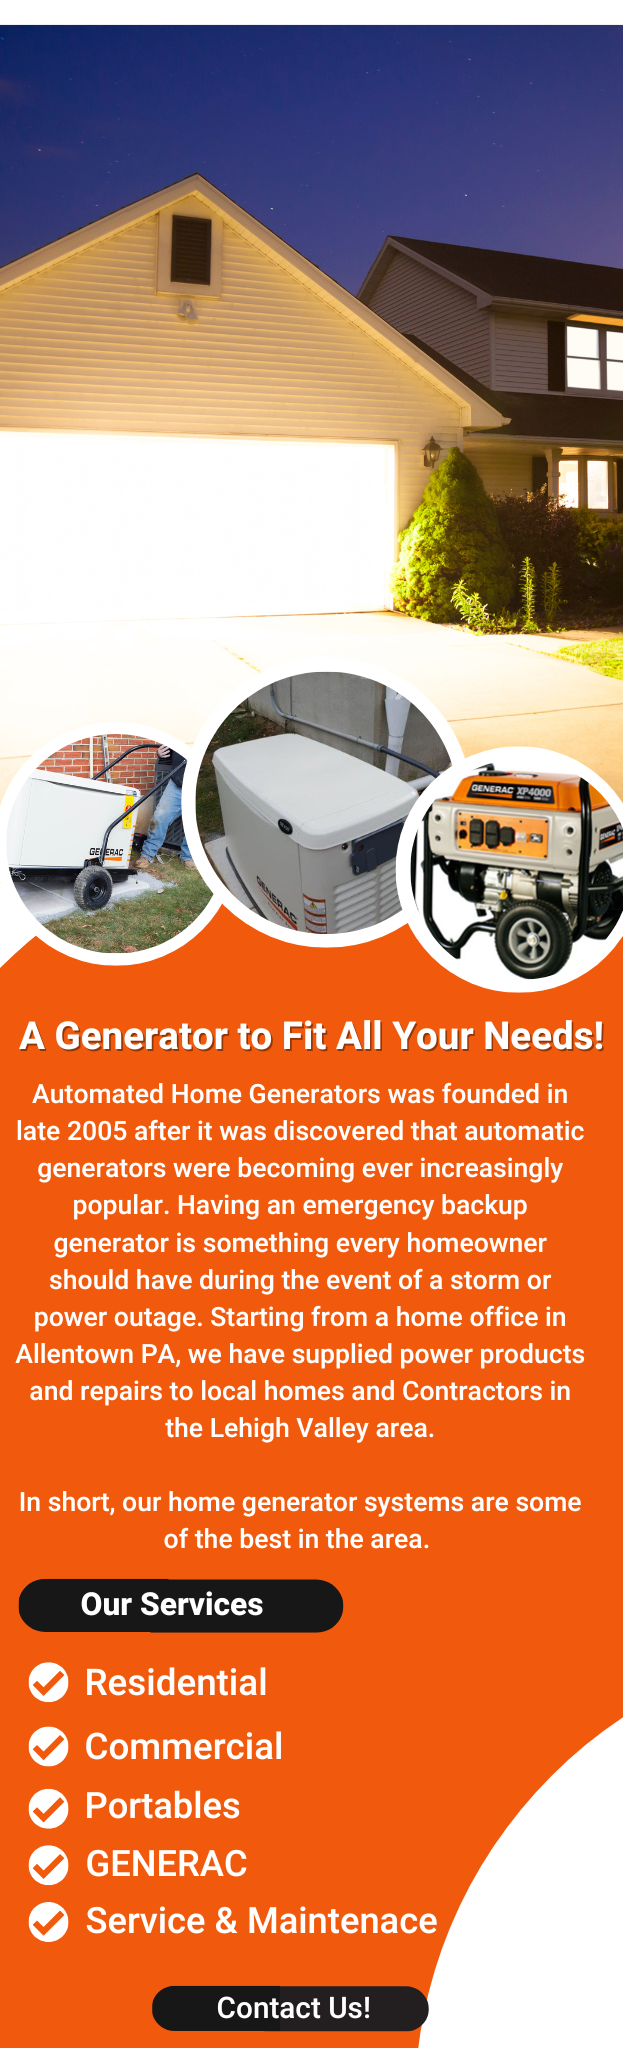 A Generator Fit for All Your Needs! 3